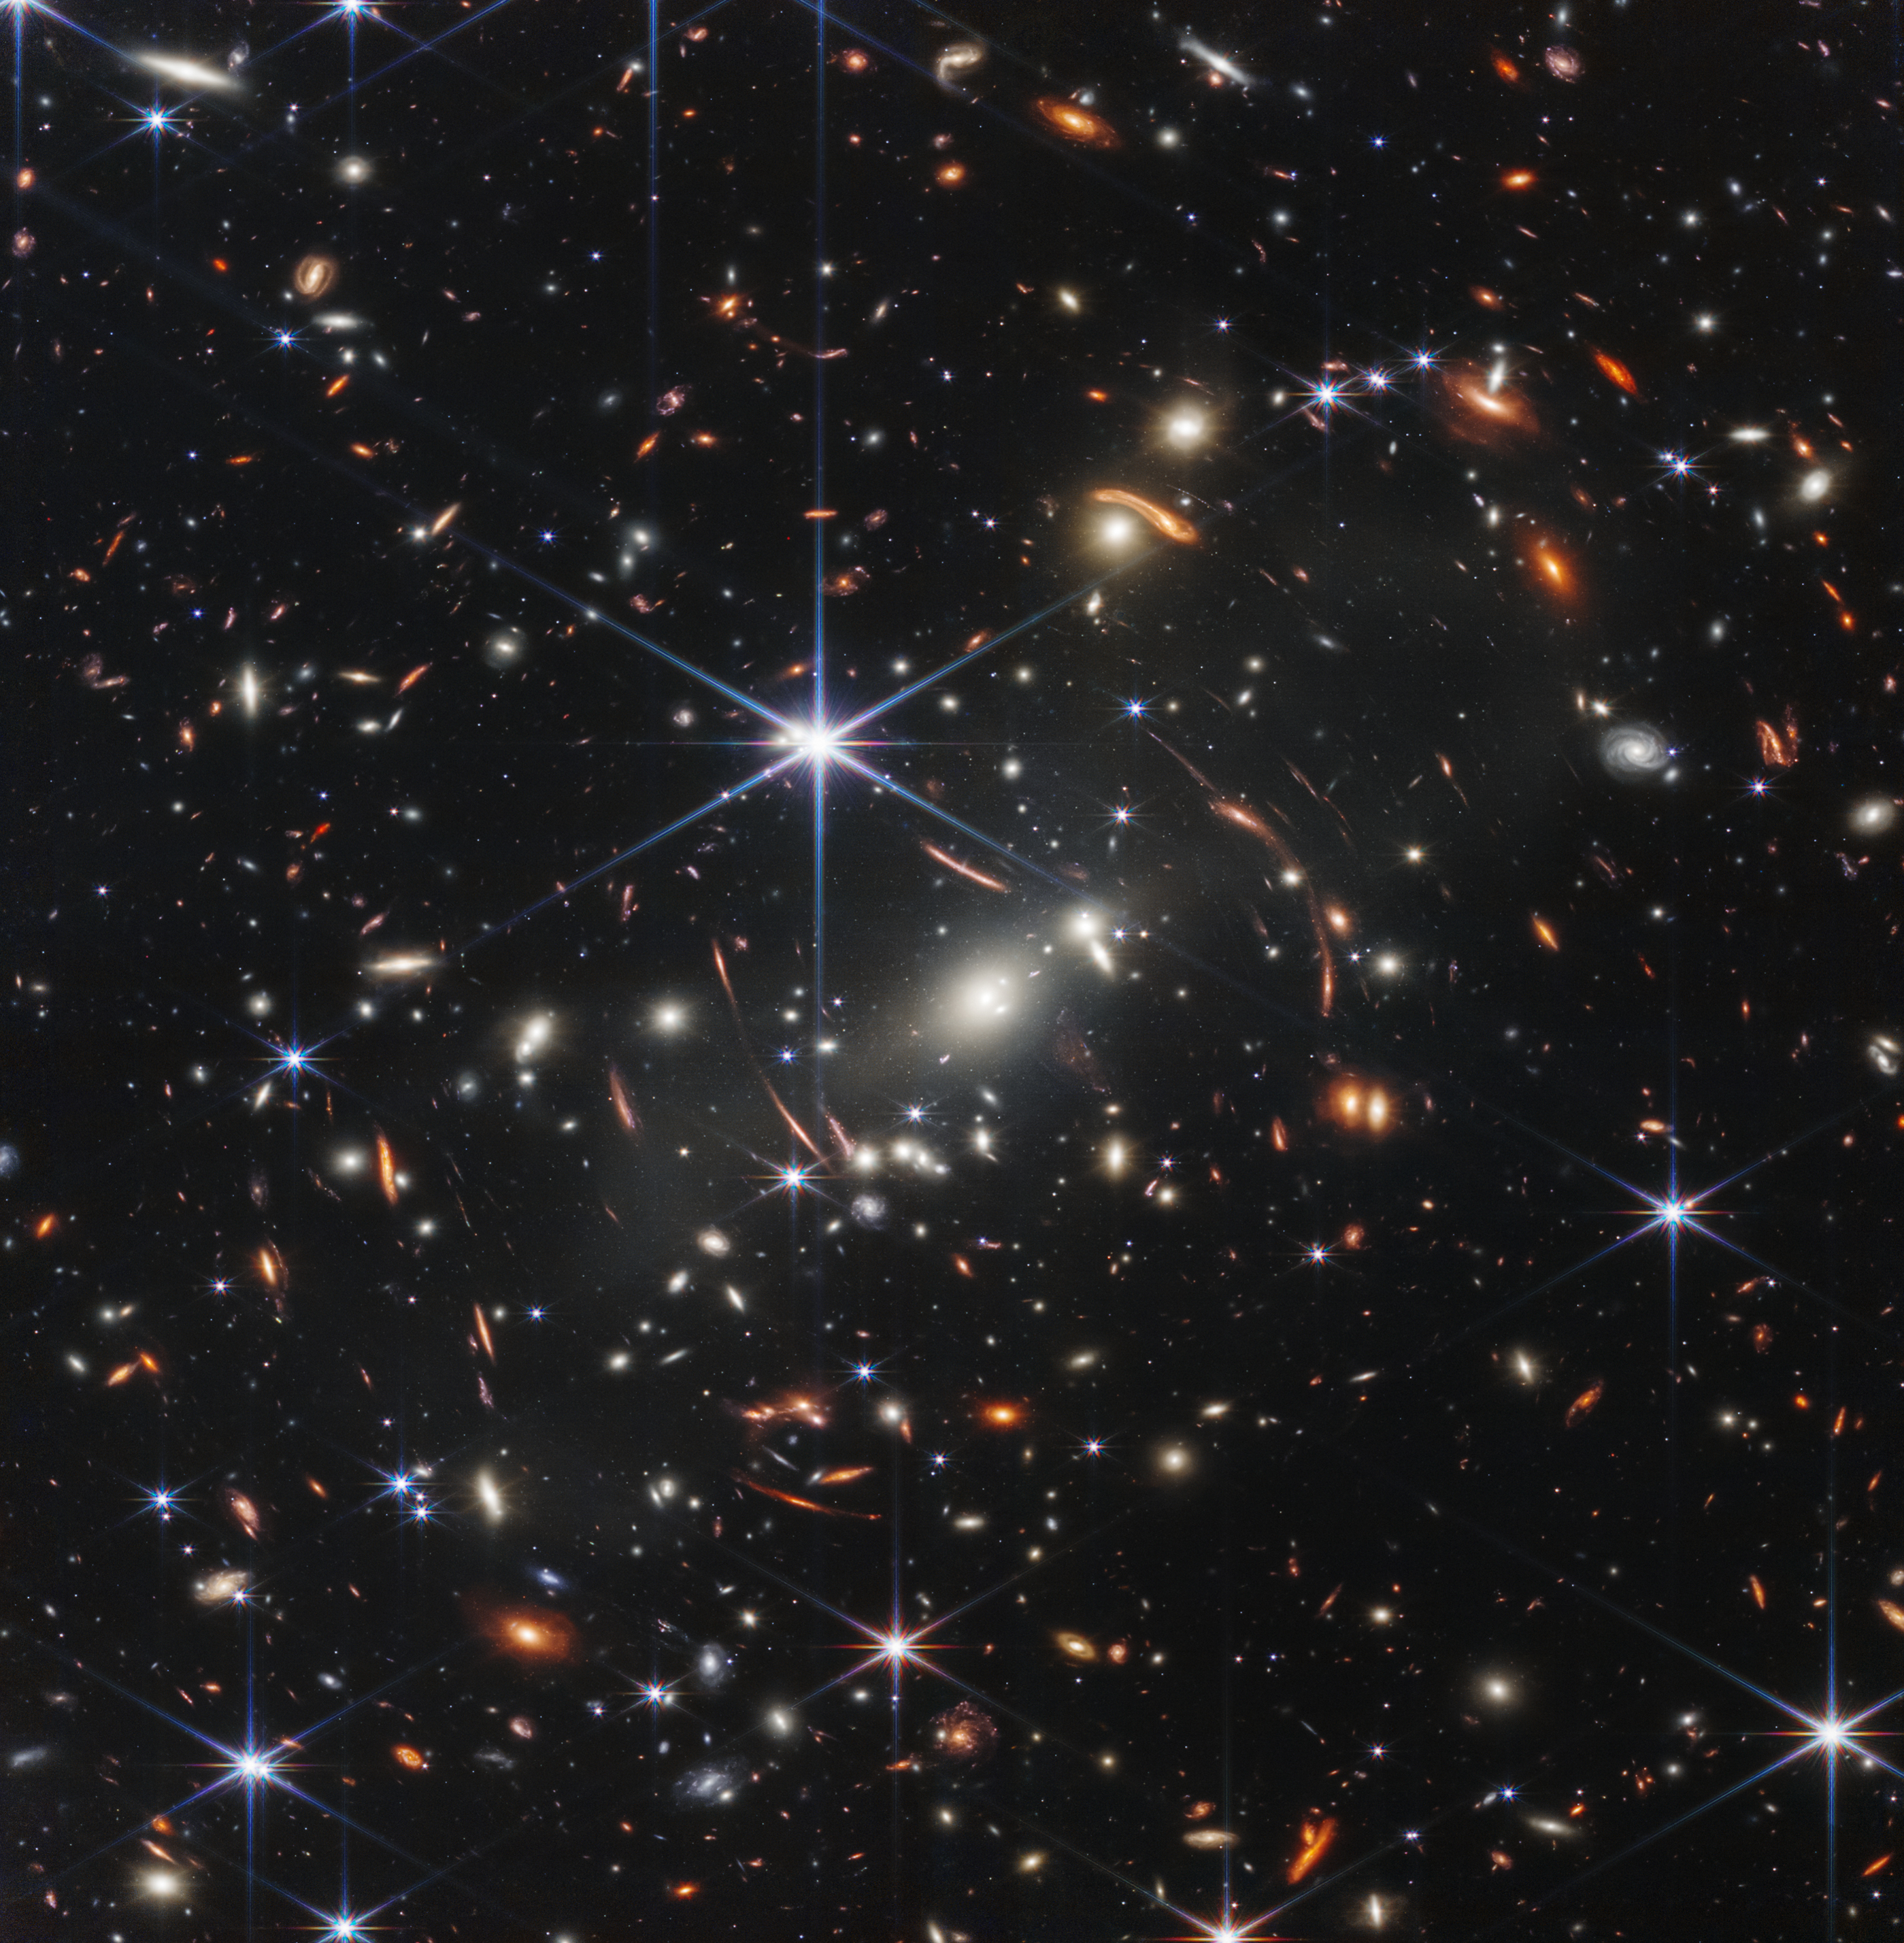 Daily News | Online News This photo by NASA's James Webb Space Telescope, which the agency unveiled on July 11, 2022, shows the galaxy cluster SMACS 0723 as it appeared 4.6 billion years ago. It’s the first science-quality image that the mission has revealed.